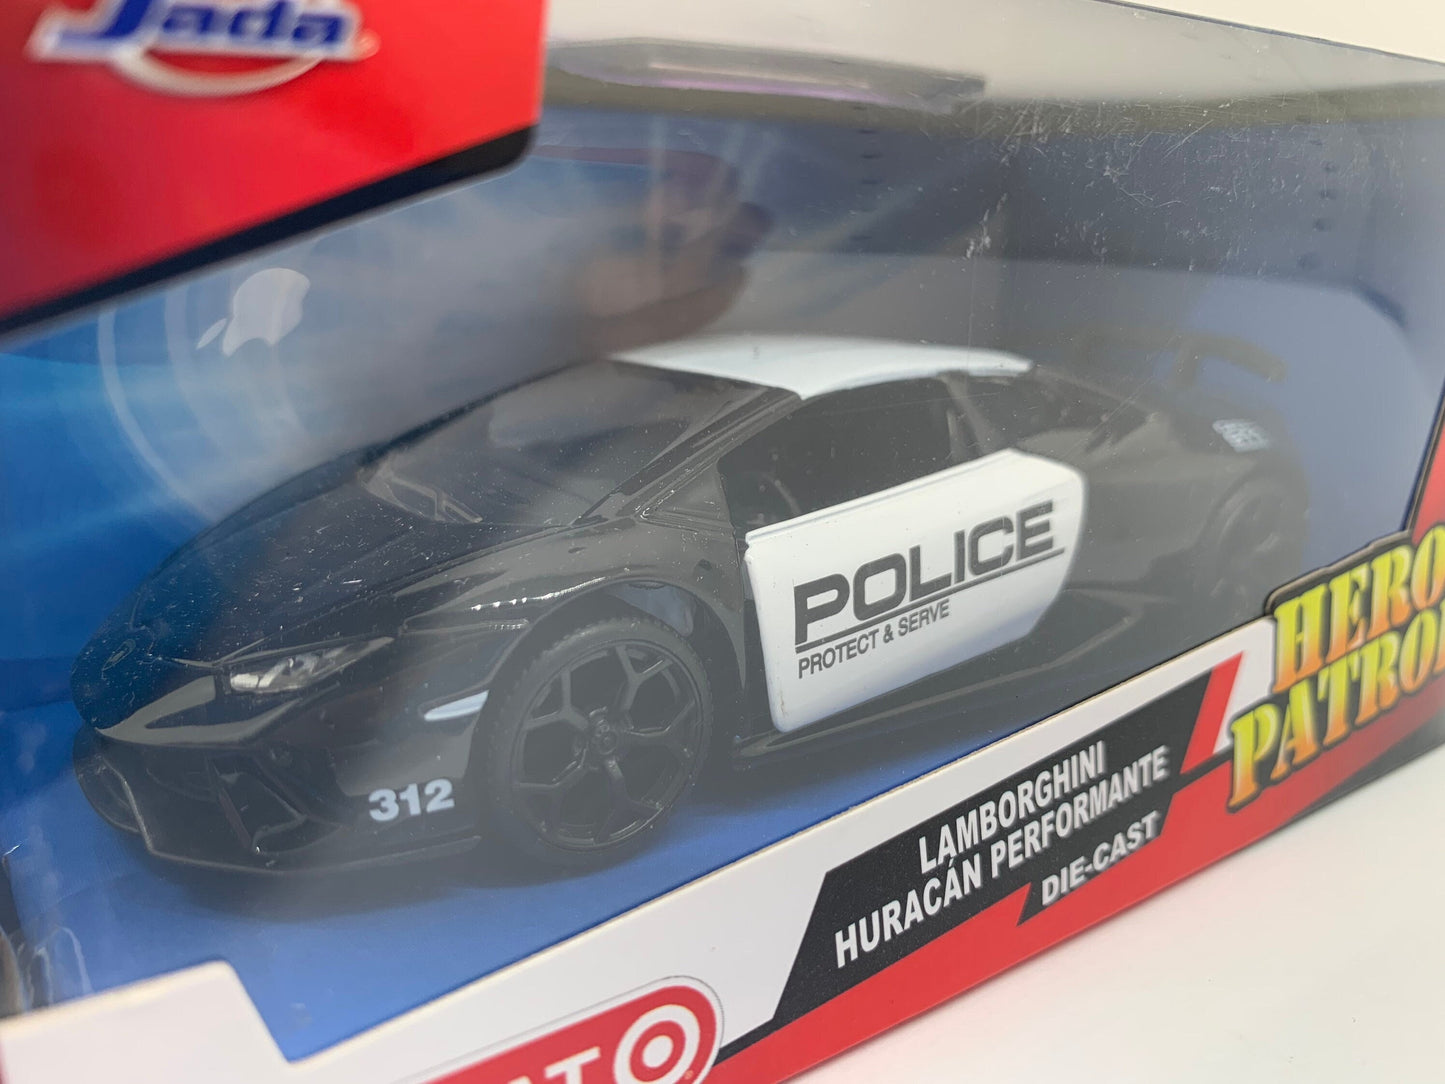 Jada Lamborghini Huracan Perfomante Police Black and White Hero Patrol Perfect Birthday Gift Collectable Scale Model Toy Car